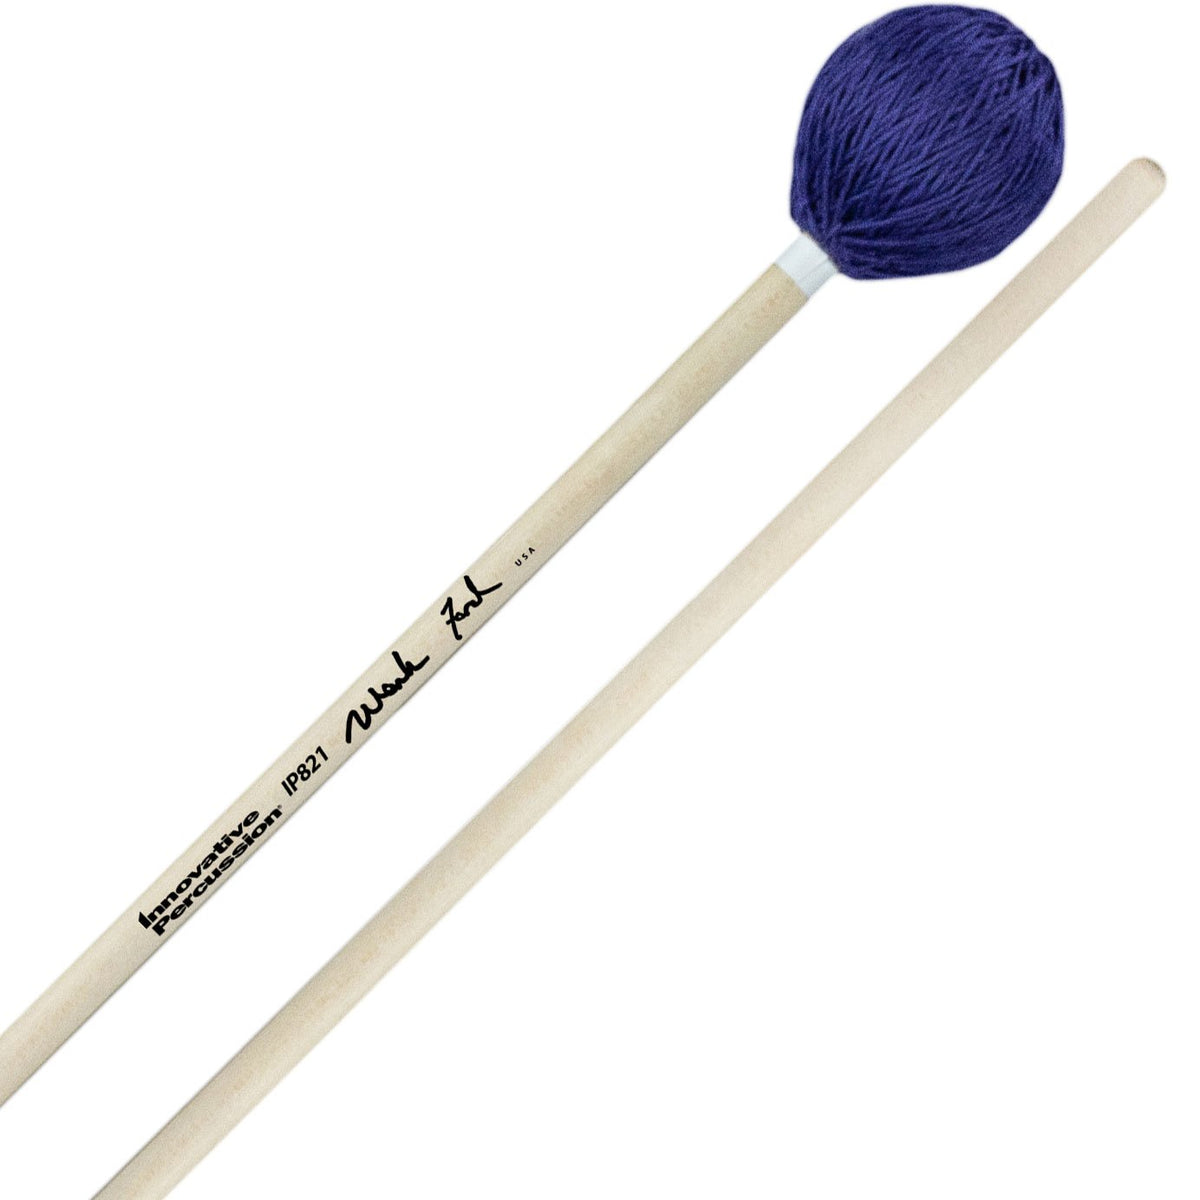 Innovative Percussion - Mark Ford (Strong Legato) Series Concert Marimba Mallets-Percussion-Innovative Percussion-Rhapsody IP821: Articulate Medium-Music Elements